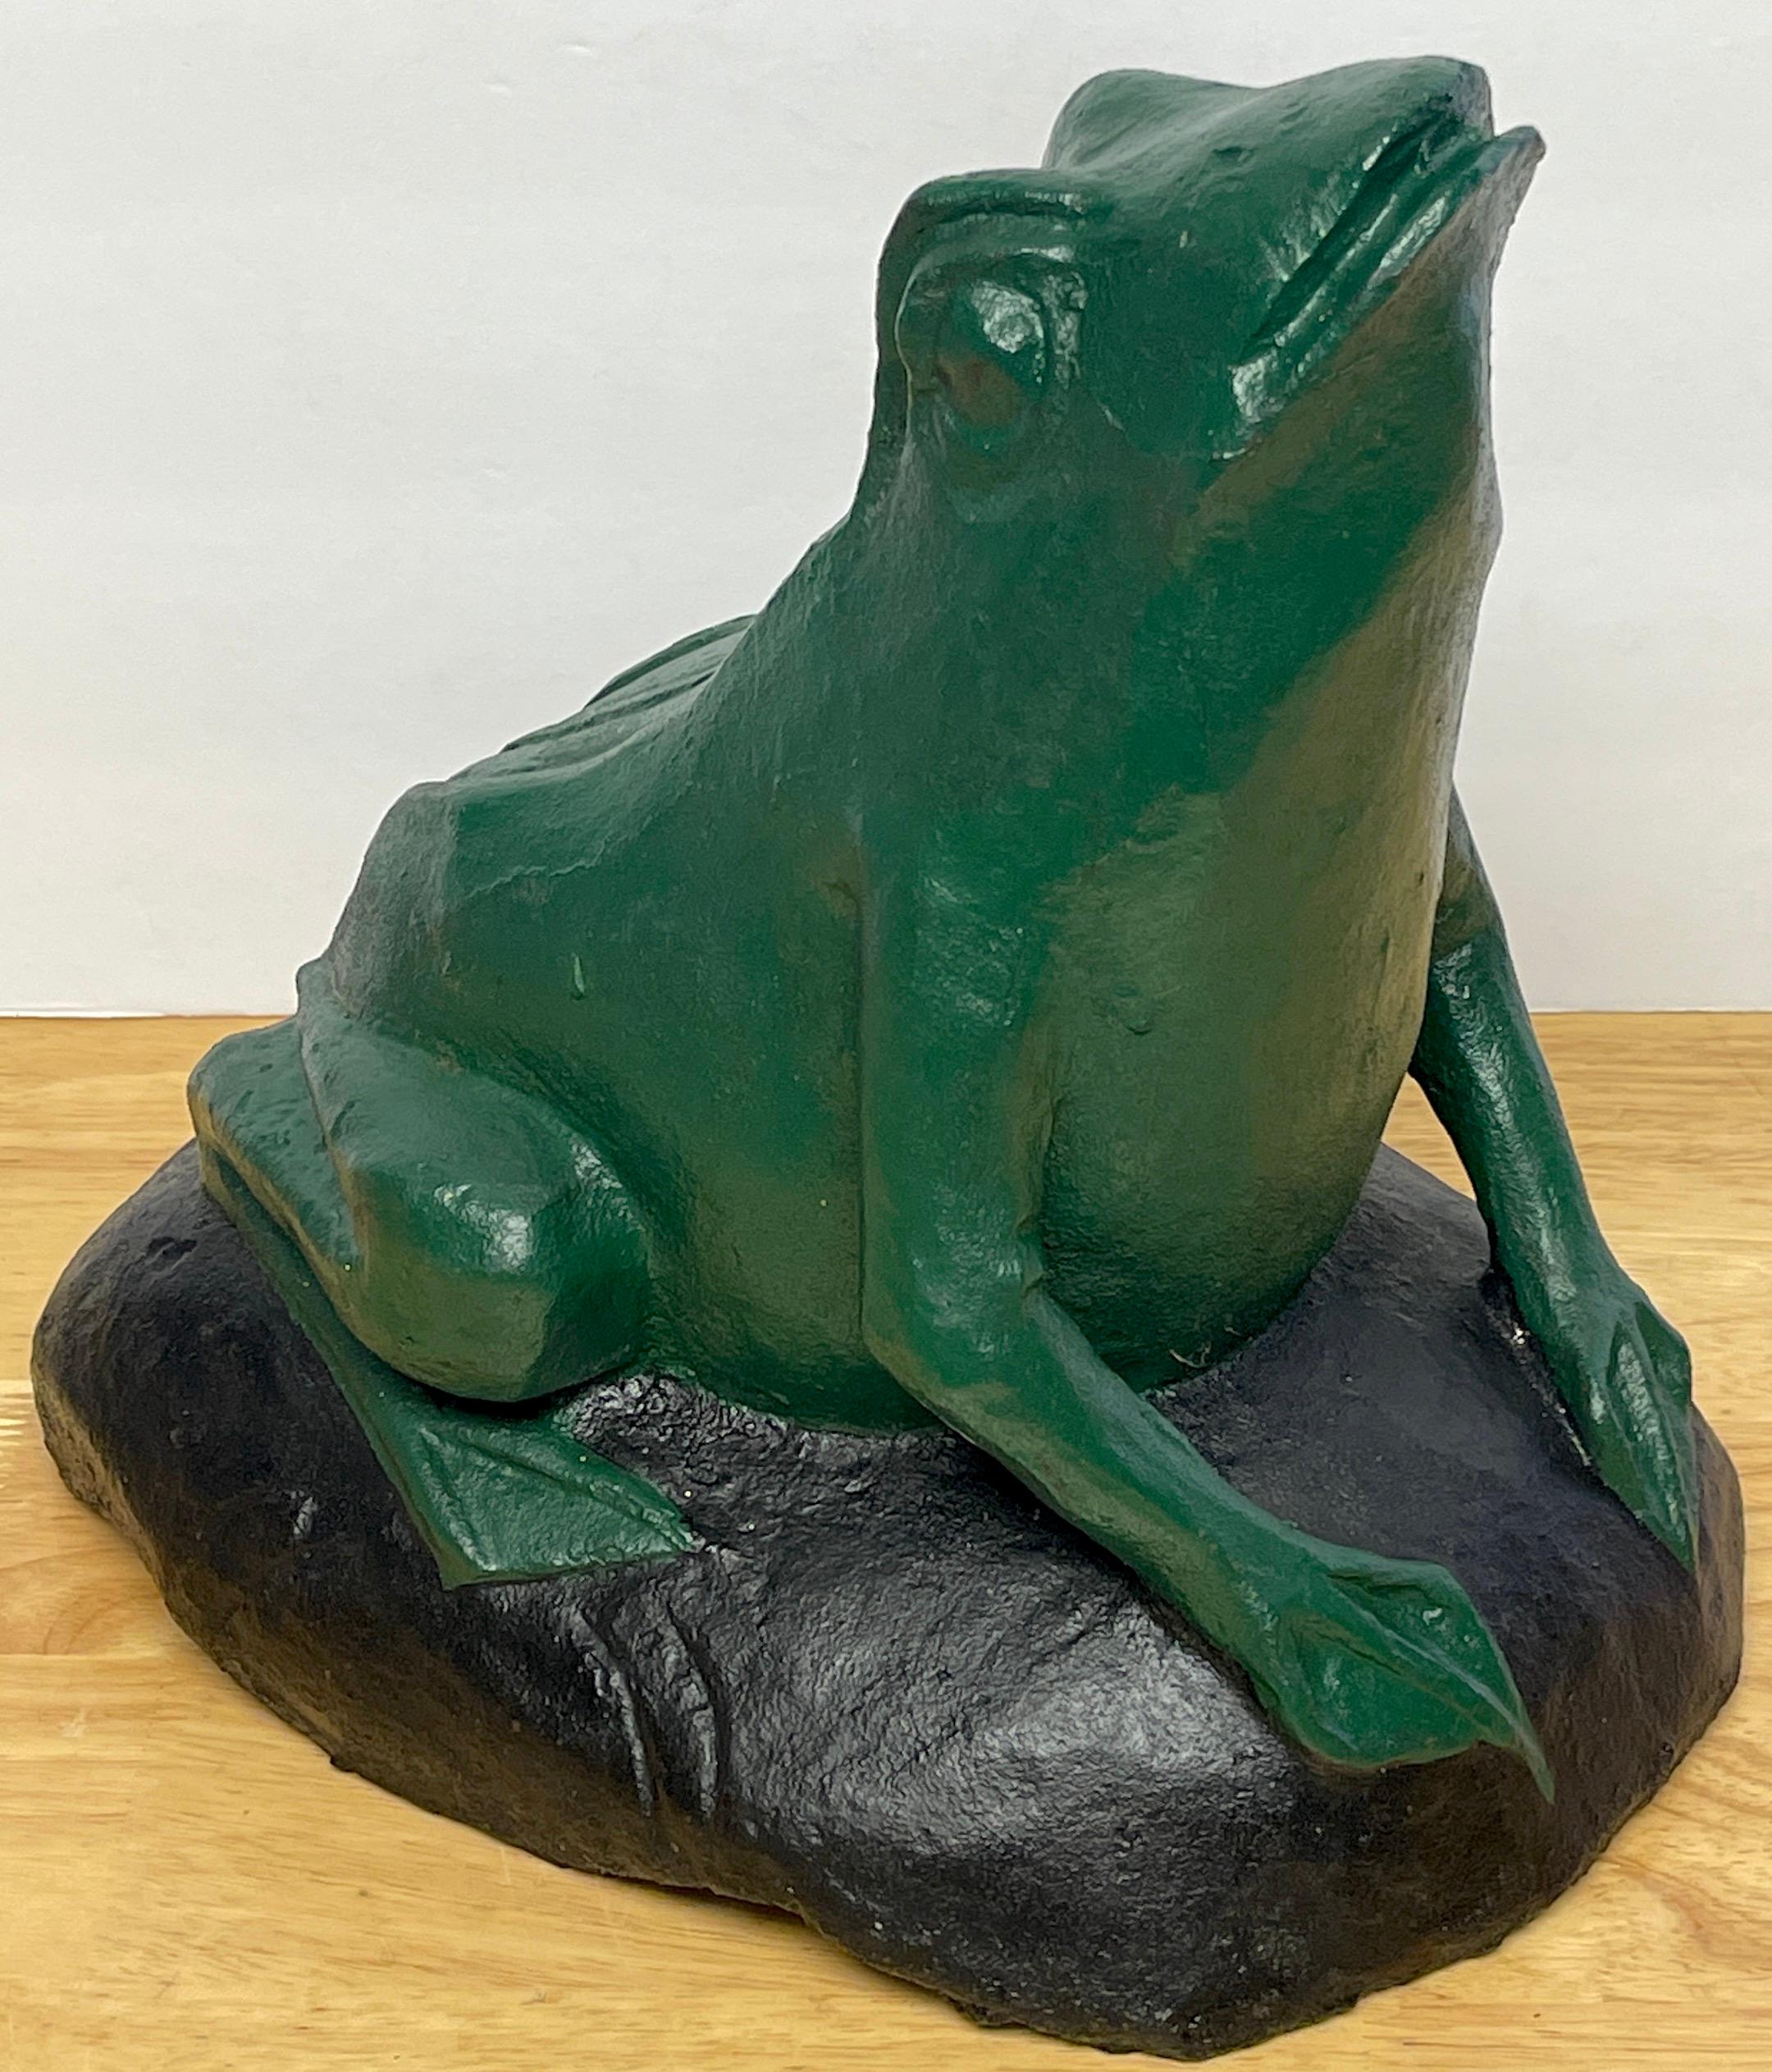 Large Antique cast iron seated frog door stop.
USA, Circa 1920s.

A rare and unusual model, of large size, depicts a seated green frog on a rock facing upwards. Retains original paint. Unmarked.